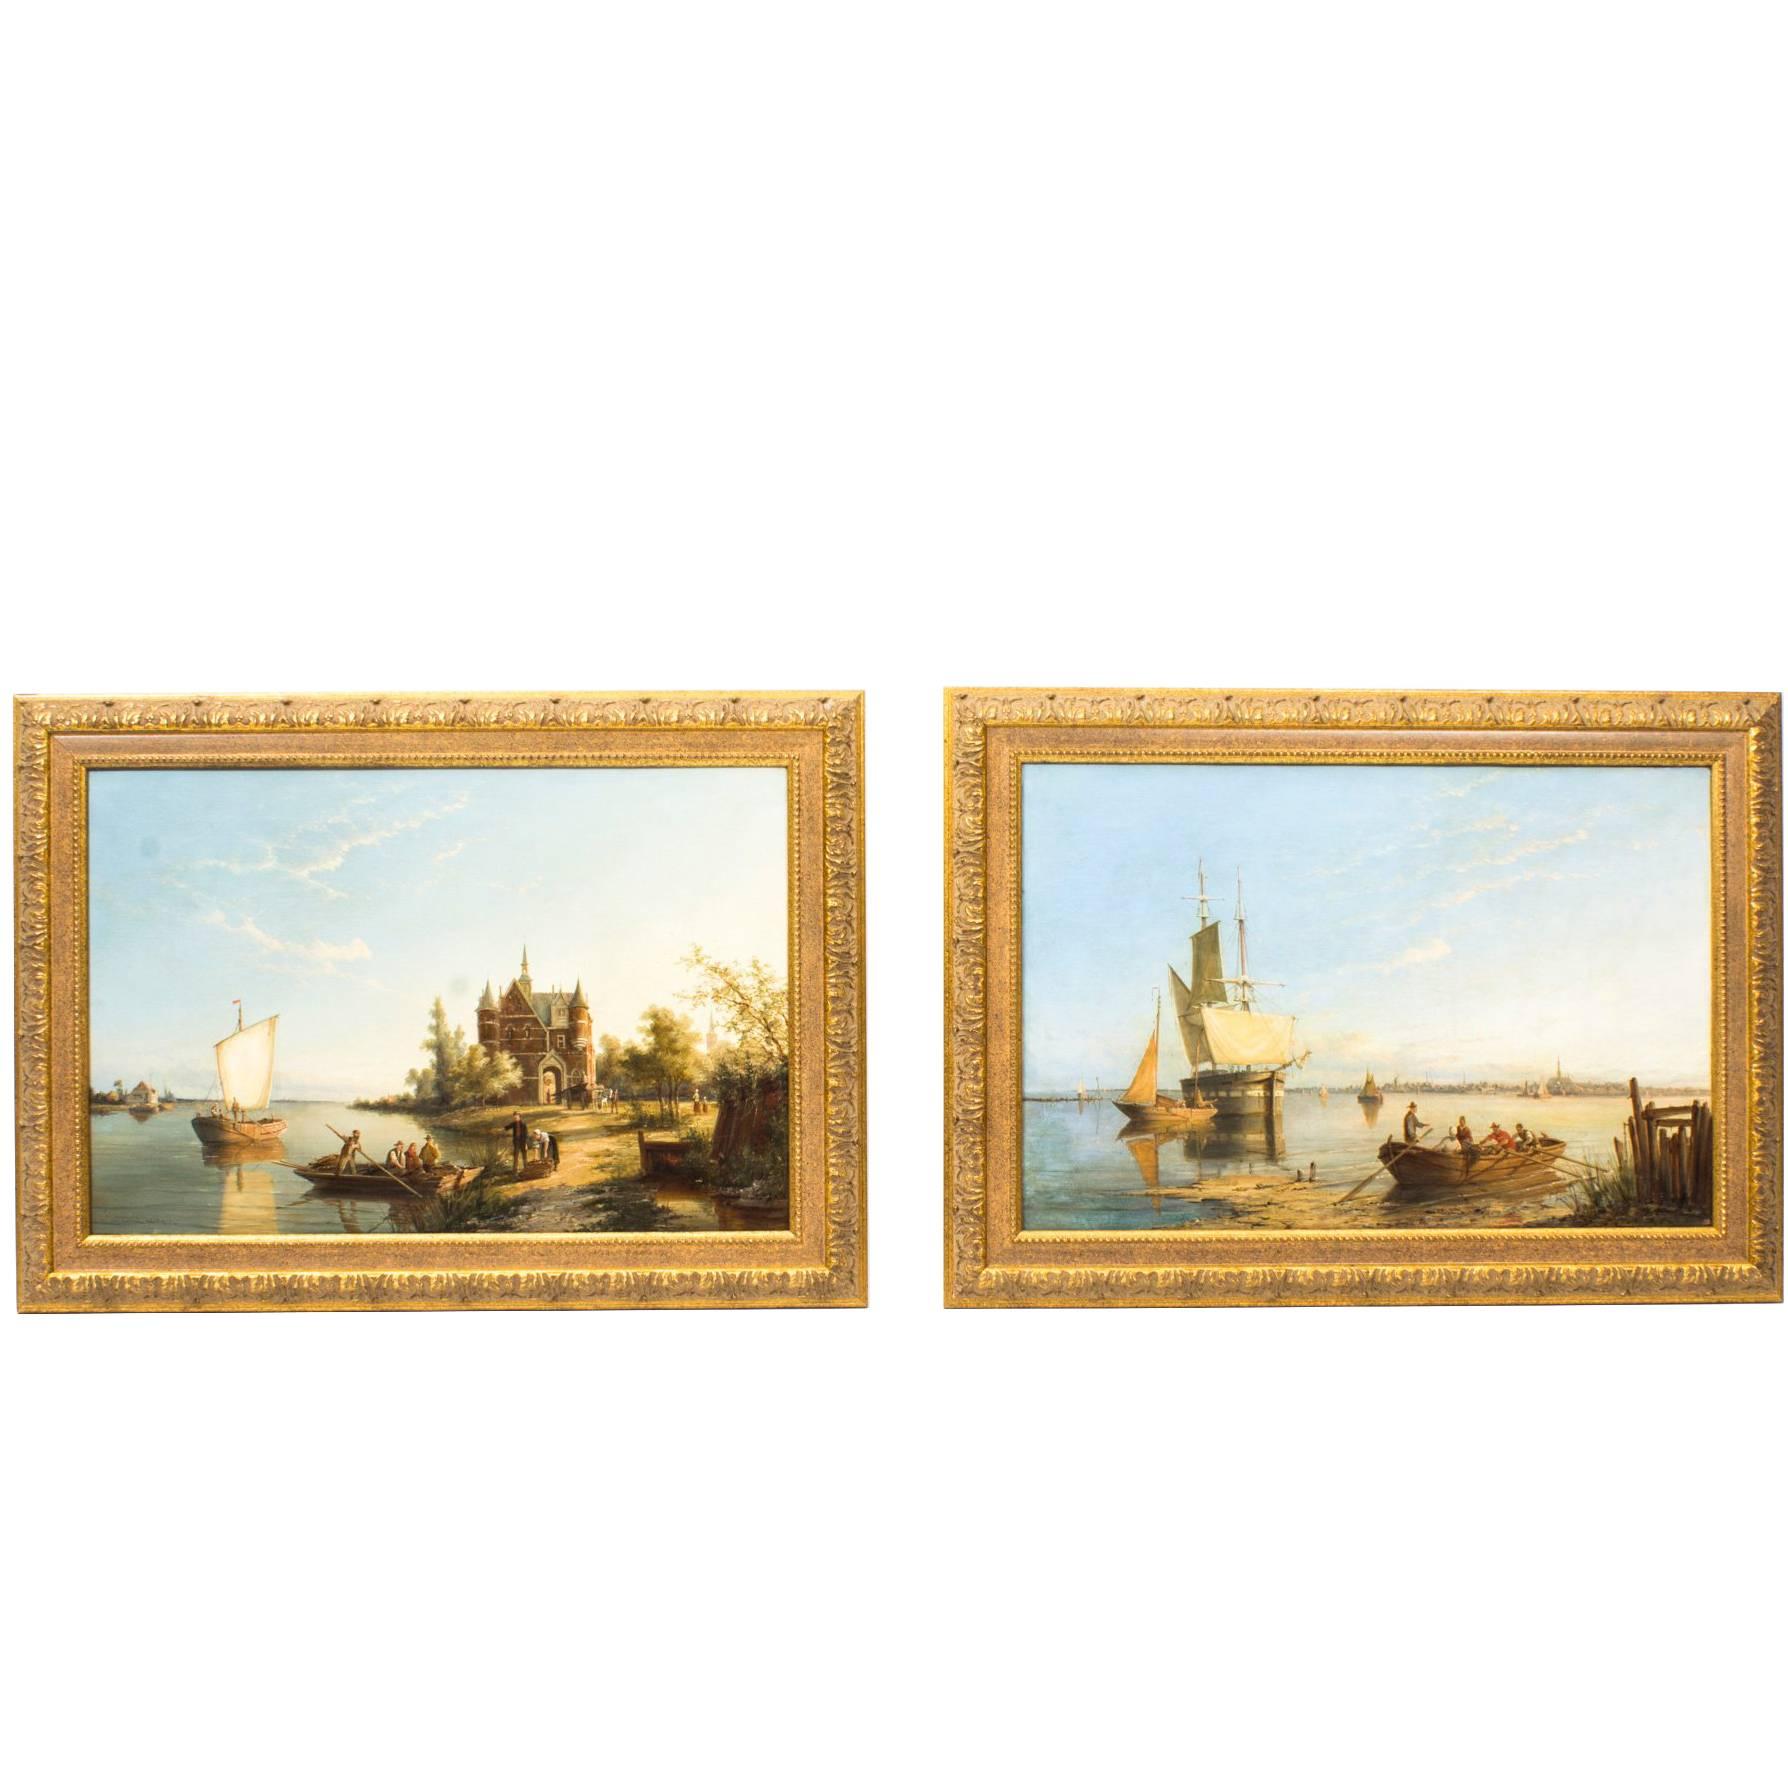 Antique Pair Oil Paintings "Zonnenbergh on the Spaarn" W R Dommersen, 1889